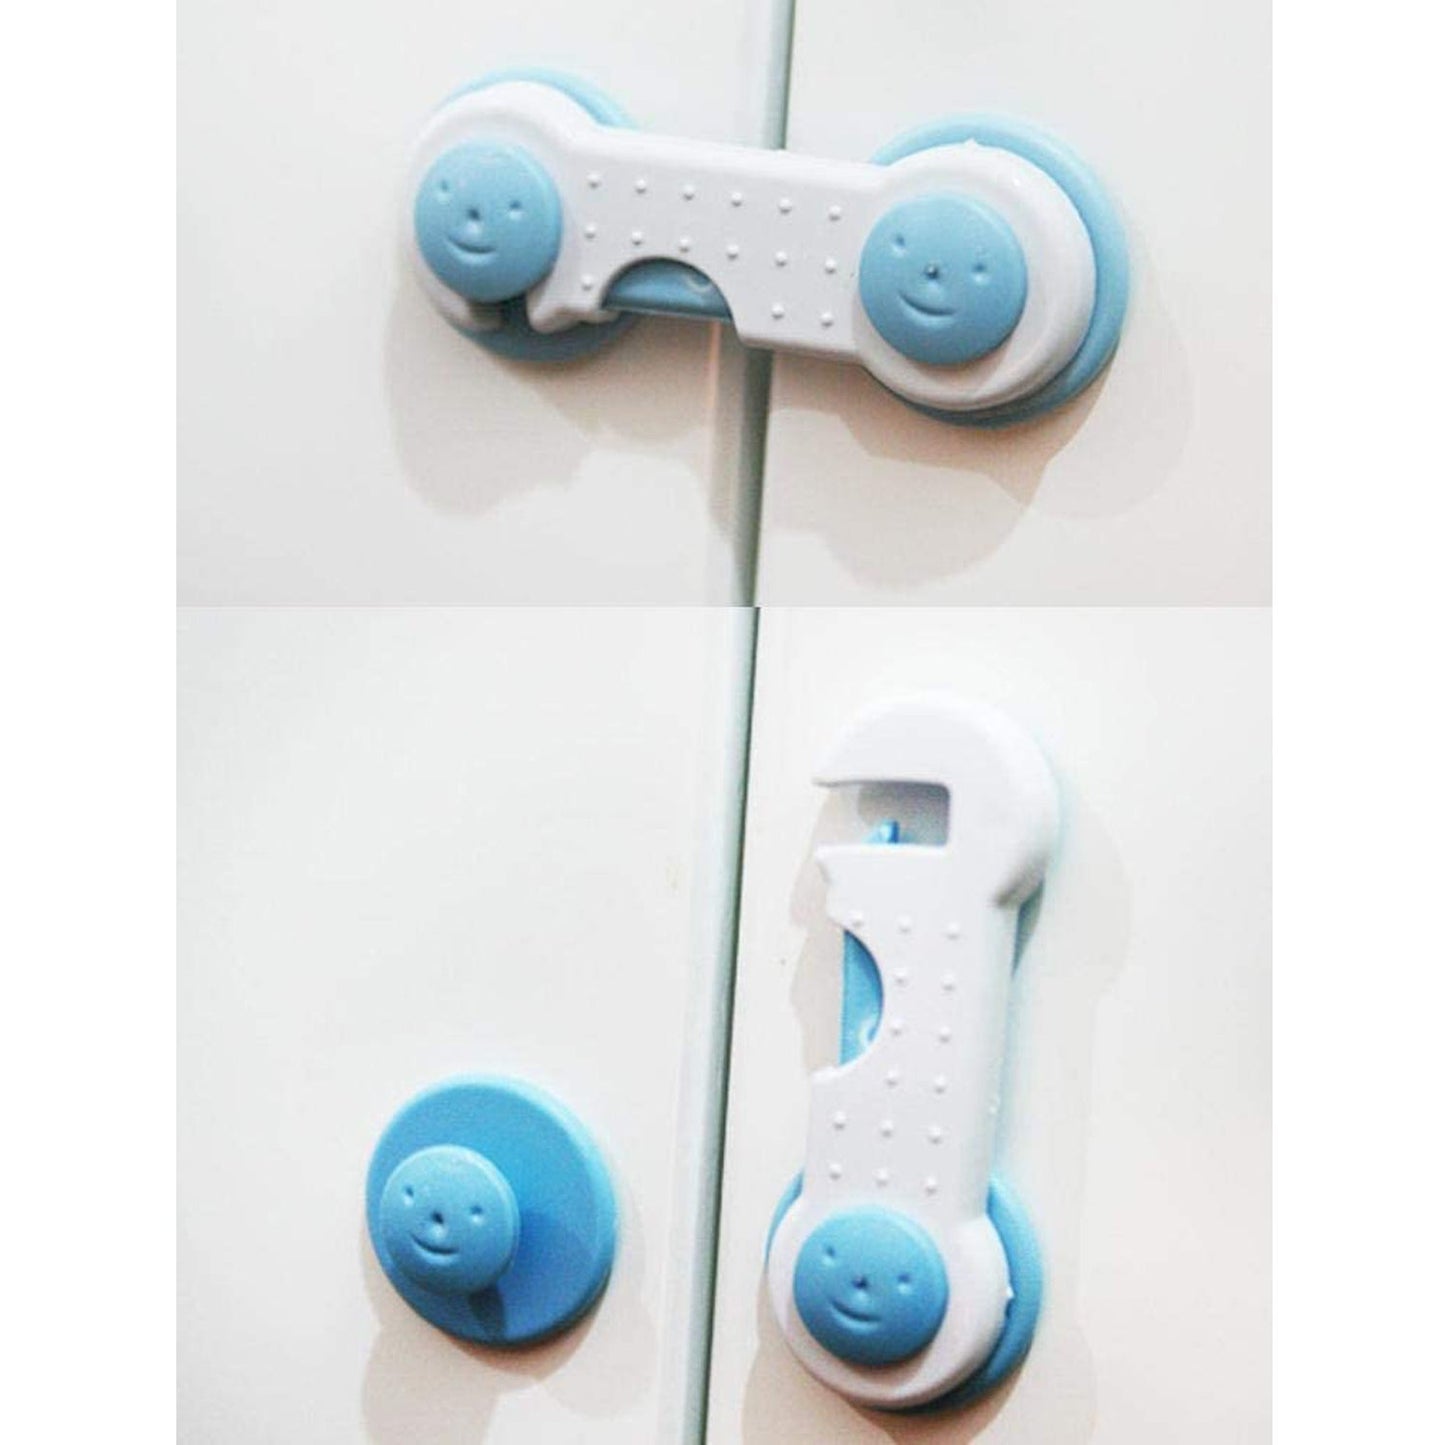 4688A Child Safety lock Child Toddler Baby Safety Locks Proofing for Cabinet Toilet Seat Fridge Door Drawers ( 1 pc) 